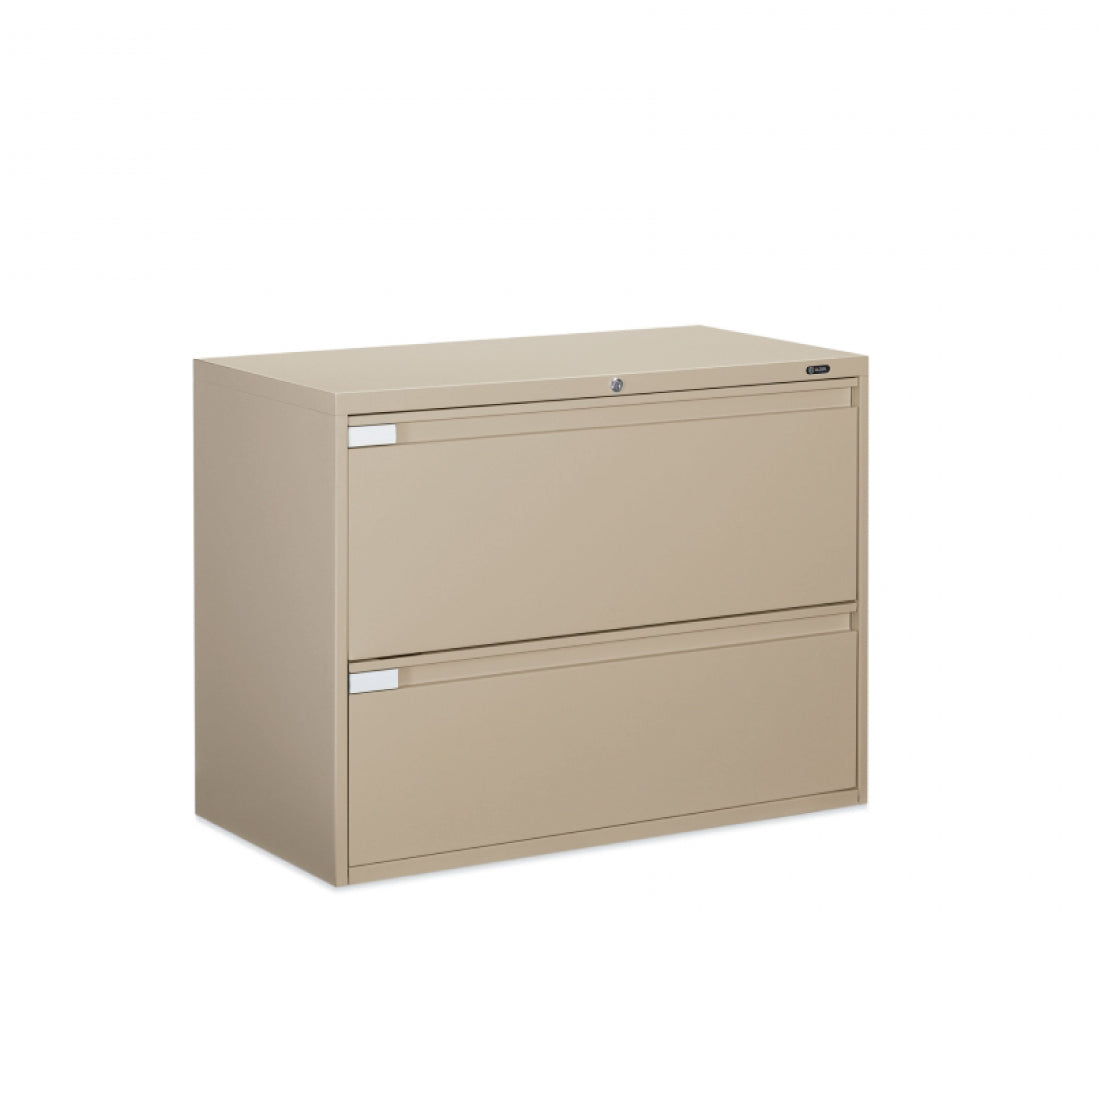 2 Drawer Lateral File (36"W) - Kainosbuy.com